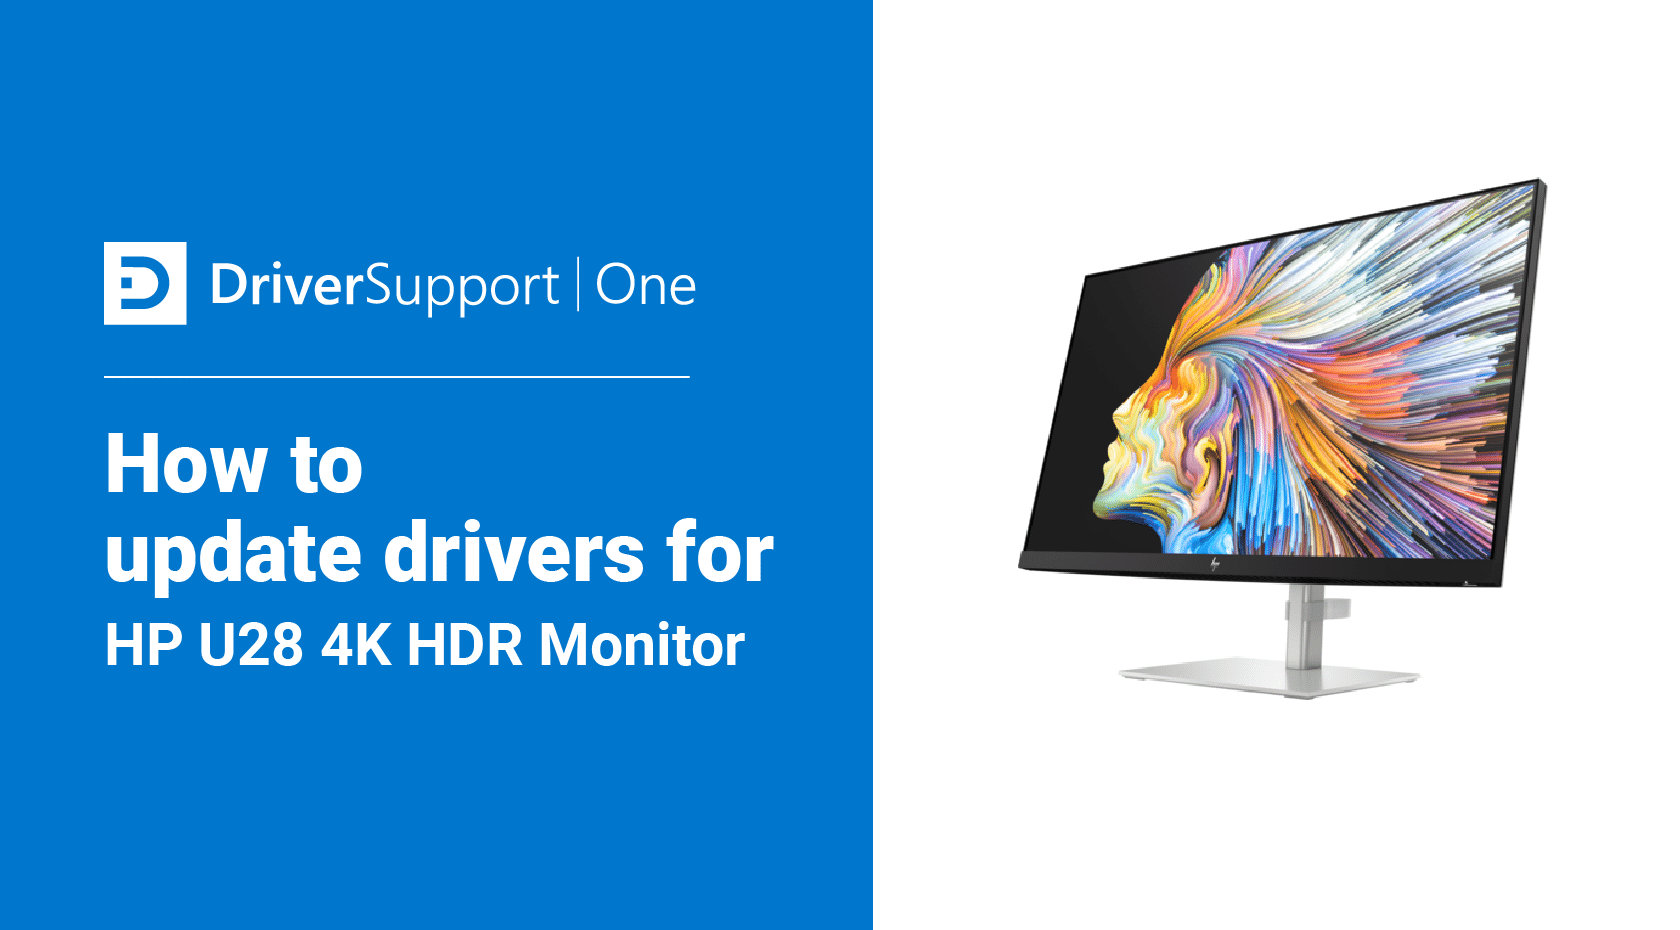 HP U28 4K HDR Monitor Features and Driver Upgrades